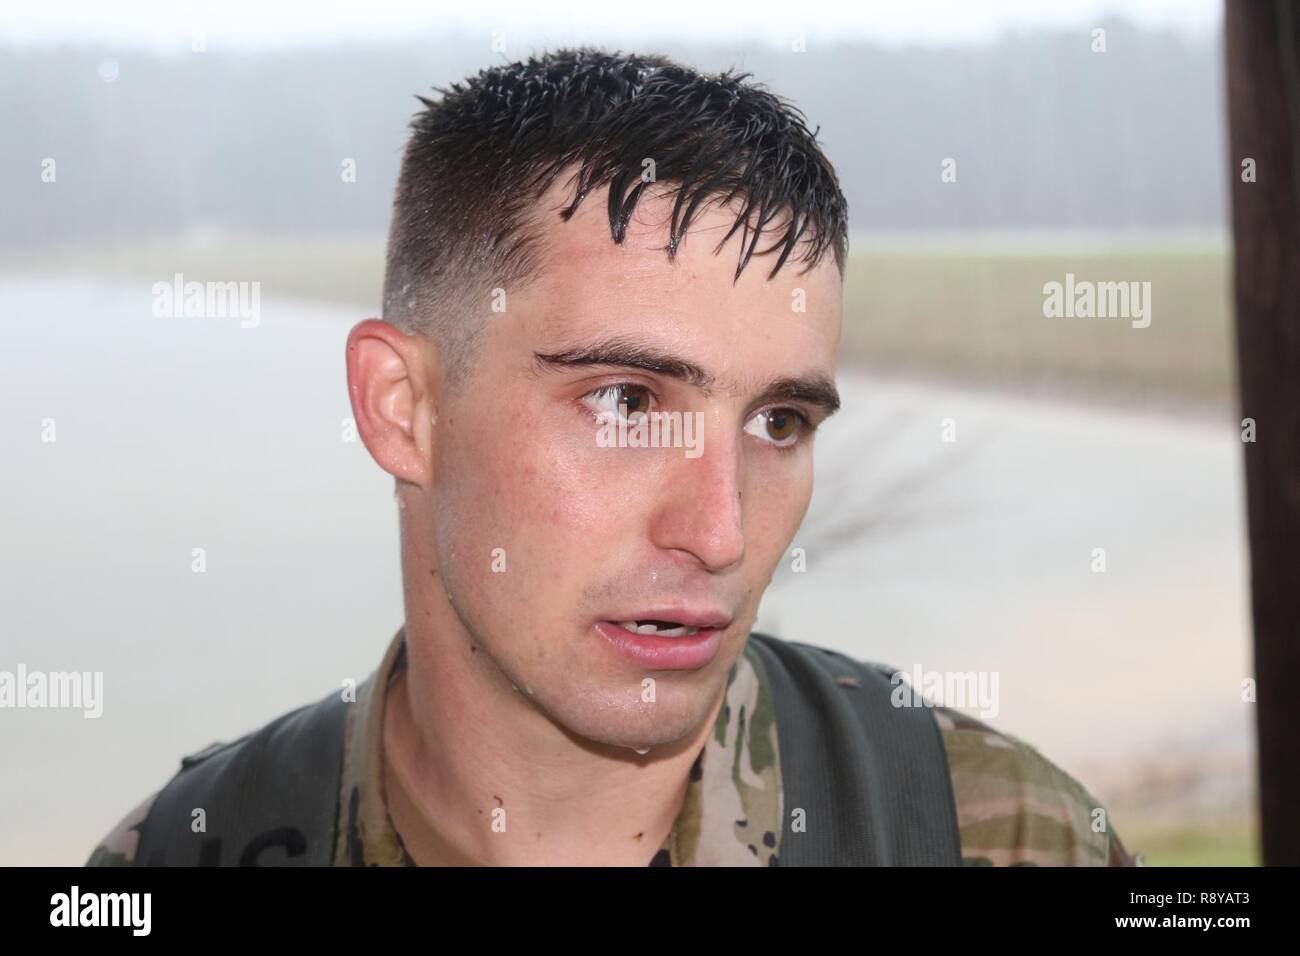 Sgt. Austin Eubanks, 287th Engineer Company based in Lucedale, Miss., recovers after conducting a land navigation course in a torrential downpour during the Mississippi National Guard’s 2017 Best Warrior Competition at Camp McCain near Elliott, Miss., March 7, 2017. (Mississippi National Guard Stock Photo